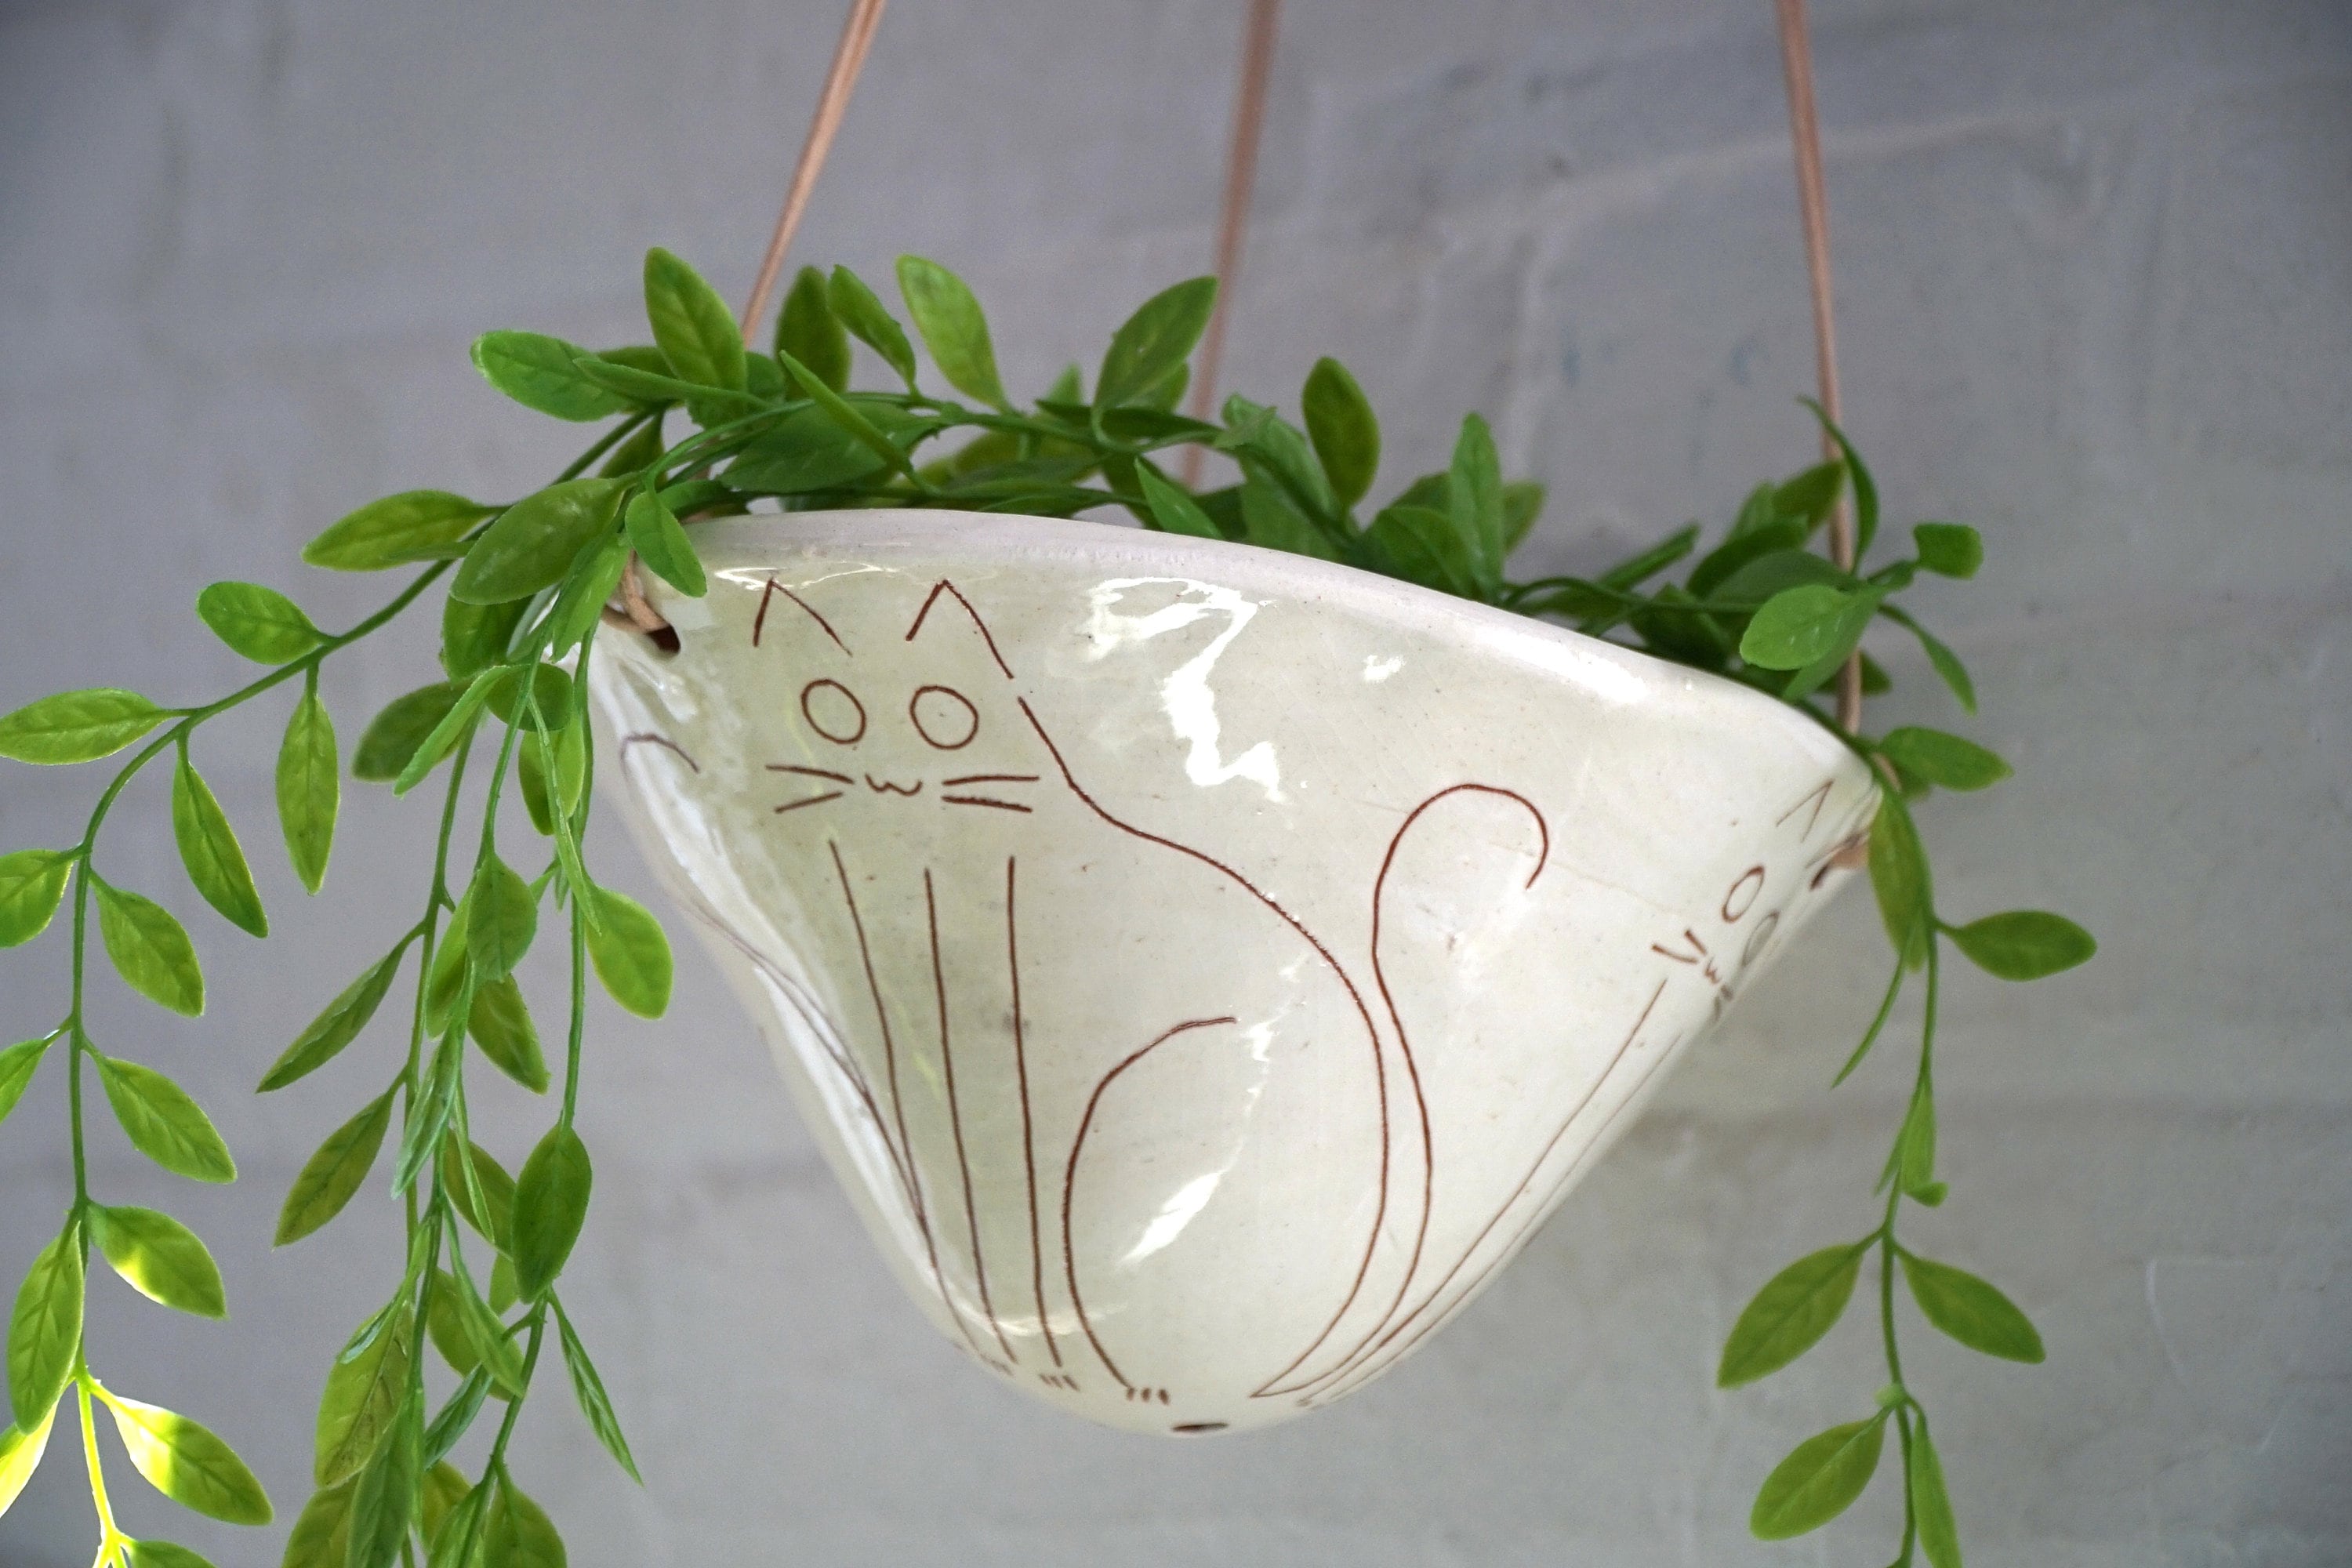 White & Terracotta Hanging Planter w/ "Kitty" Design - Hanging Pot w/ Carved Design - Succulent, Cactus, Herb, Air Plant - Home Decor